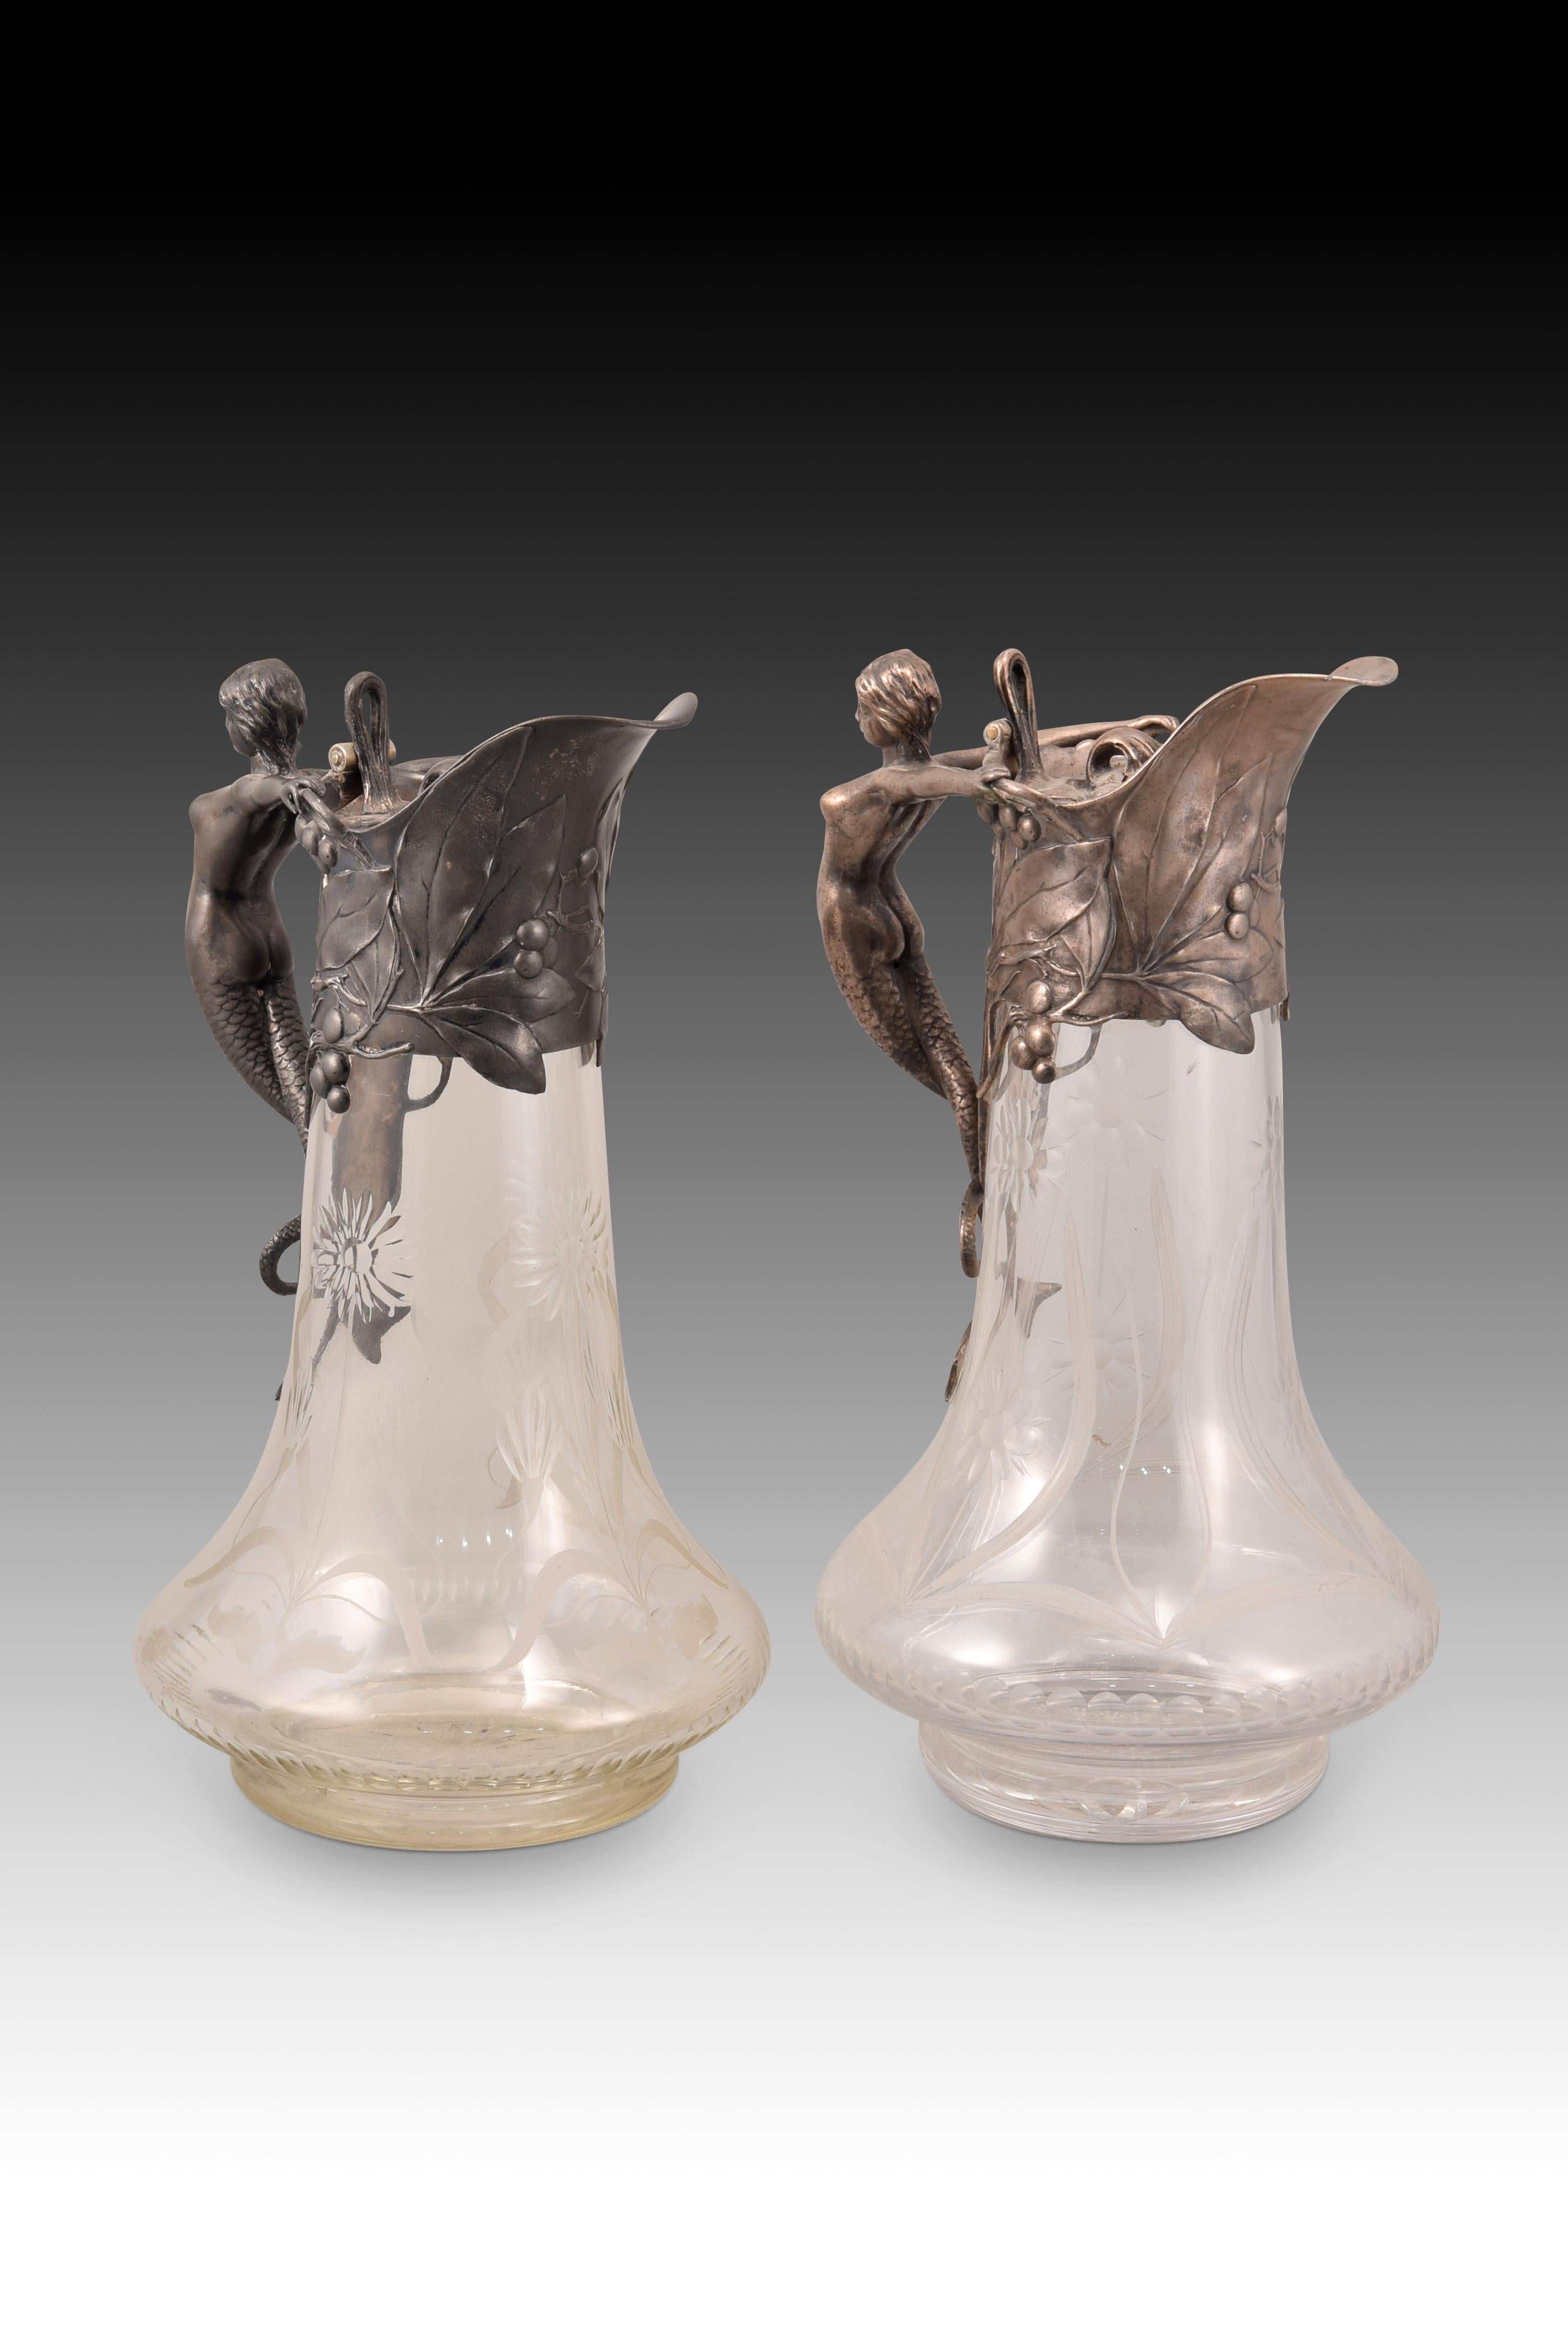 Pair of modernist jugs. Pewter, cut glass. WMF, Germany, 1903. 
They show marks. 
Pair of jugs with transparent etched and cut glass body and handle and top with silver pewter lid. The pewter area presents a delicate work of leaves, stems and